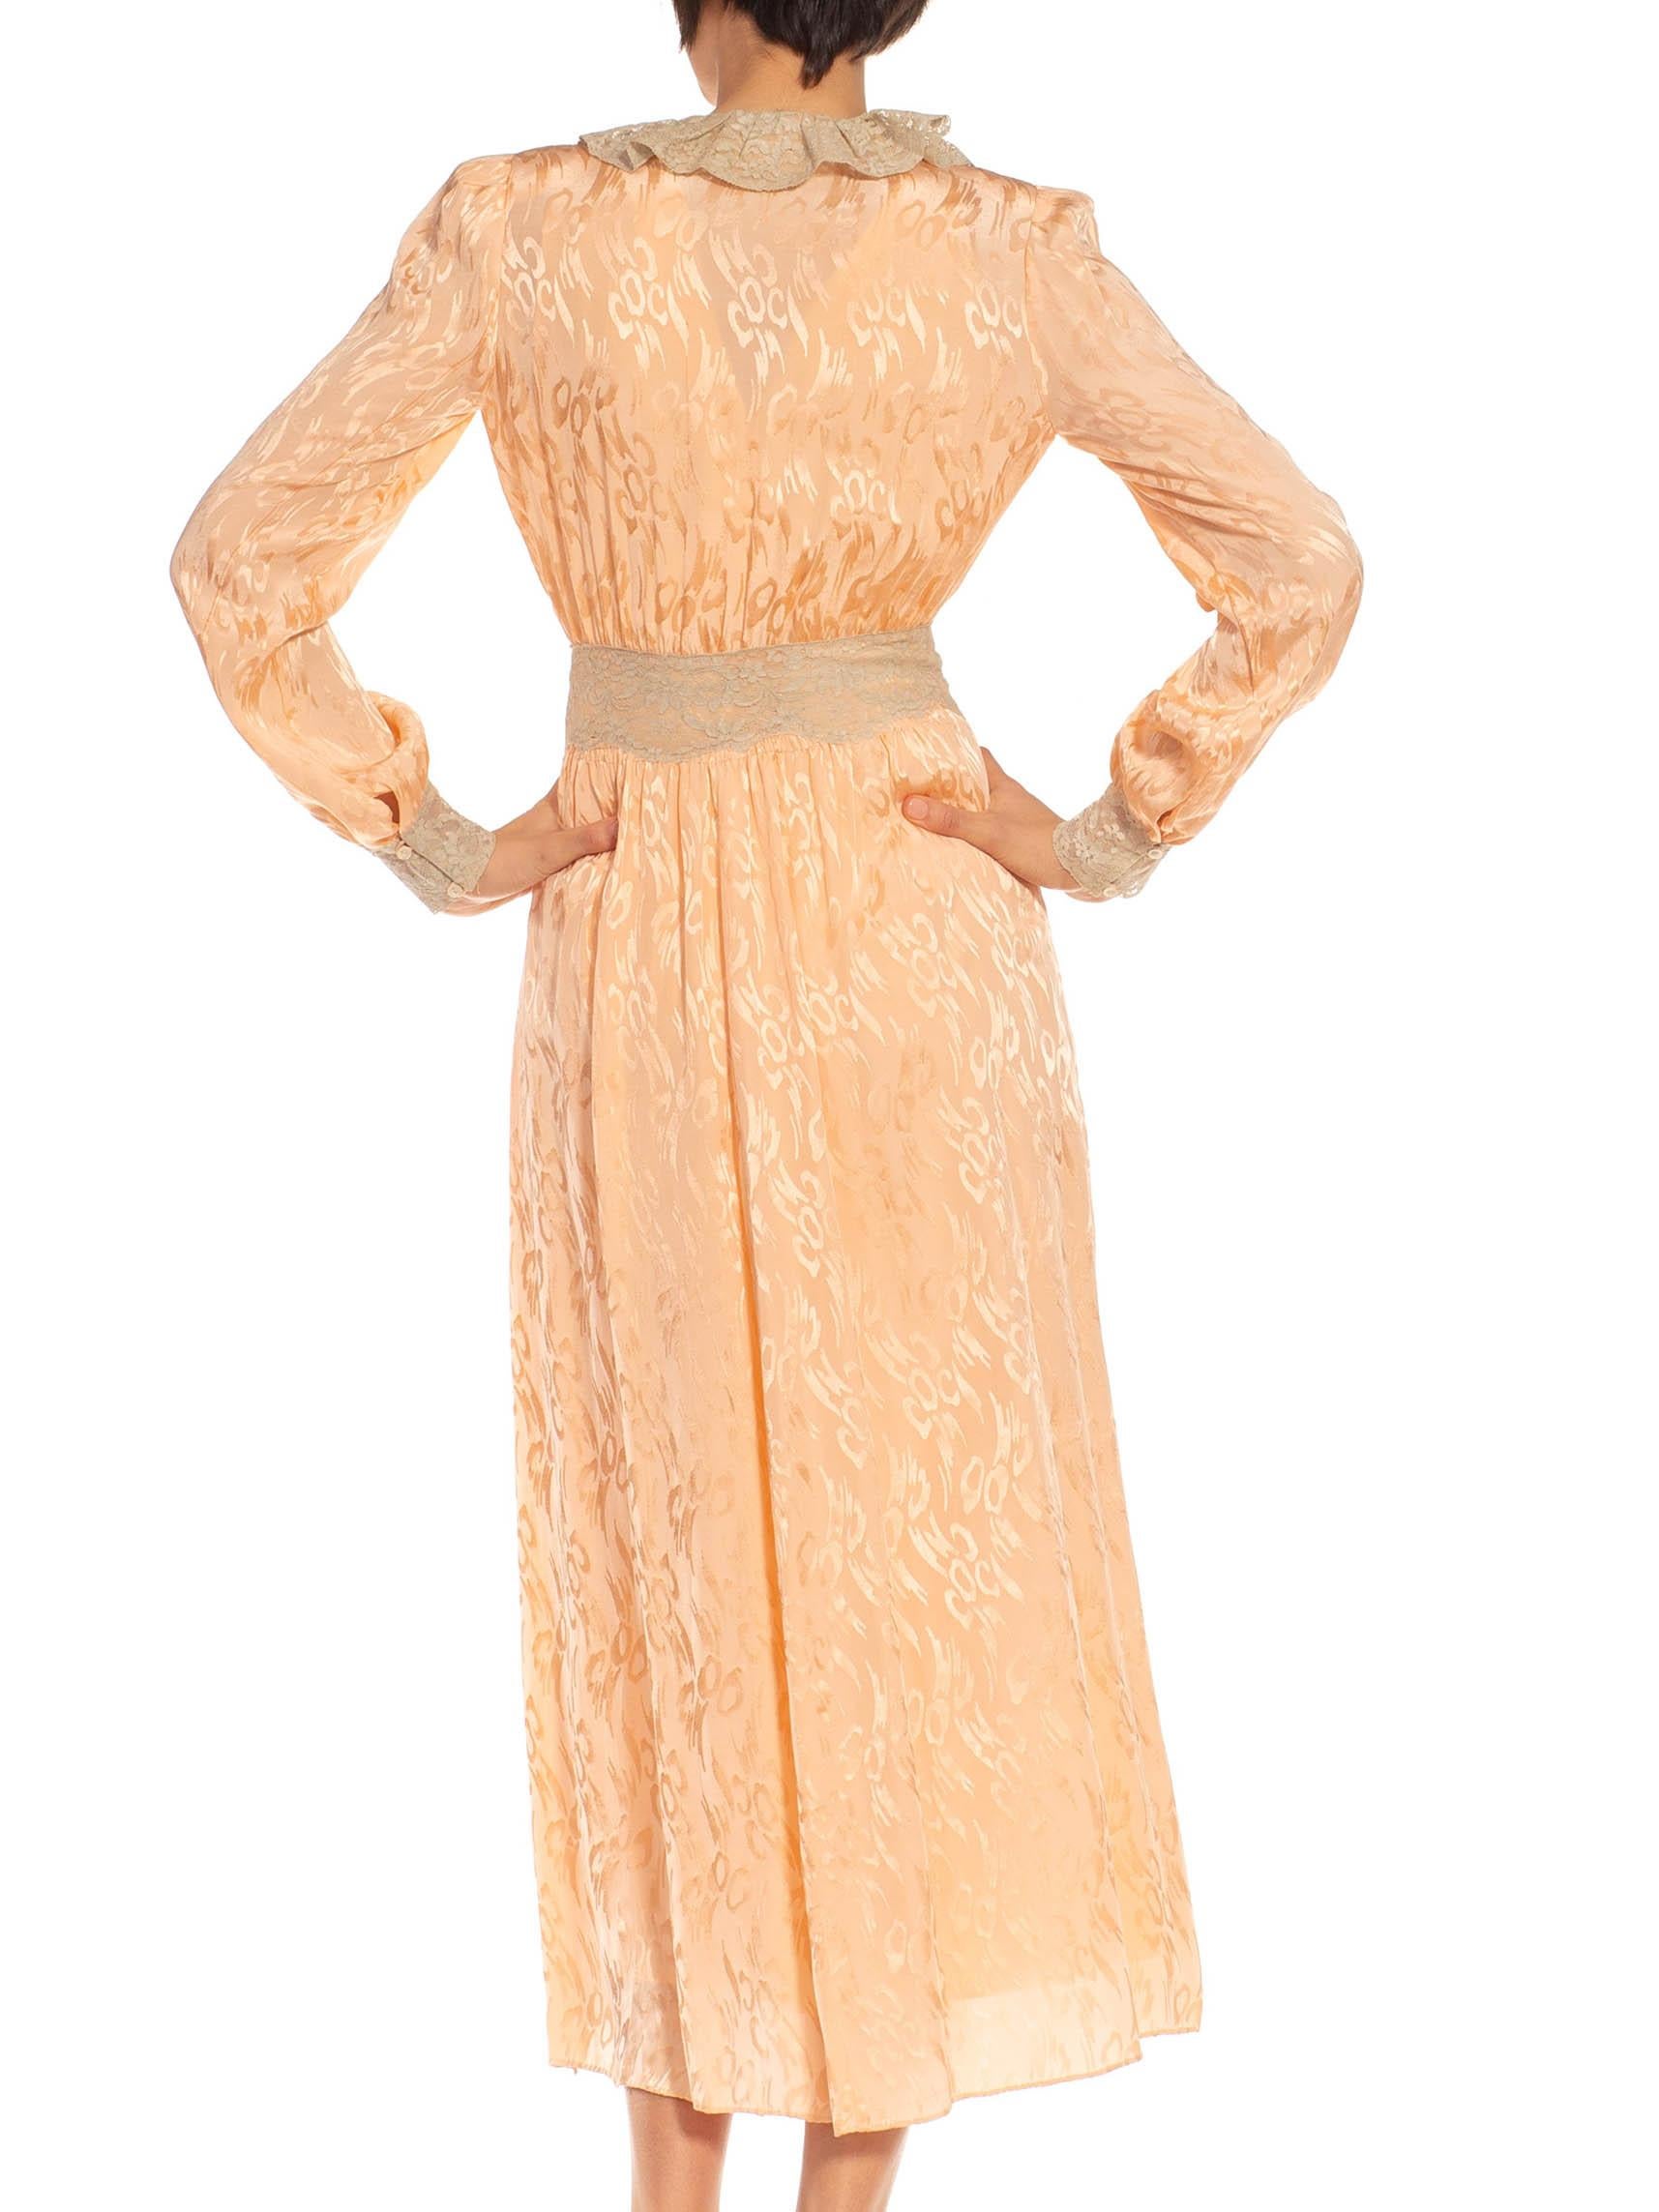 1940S Peach & Cream Lace Bias Cut Slip Dress With Jacket For Sale 5